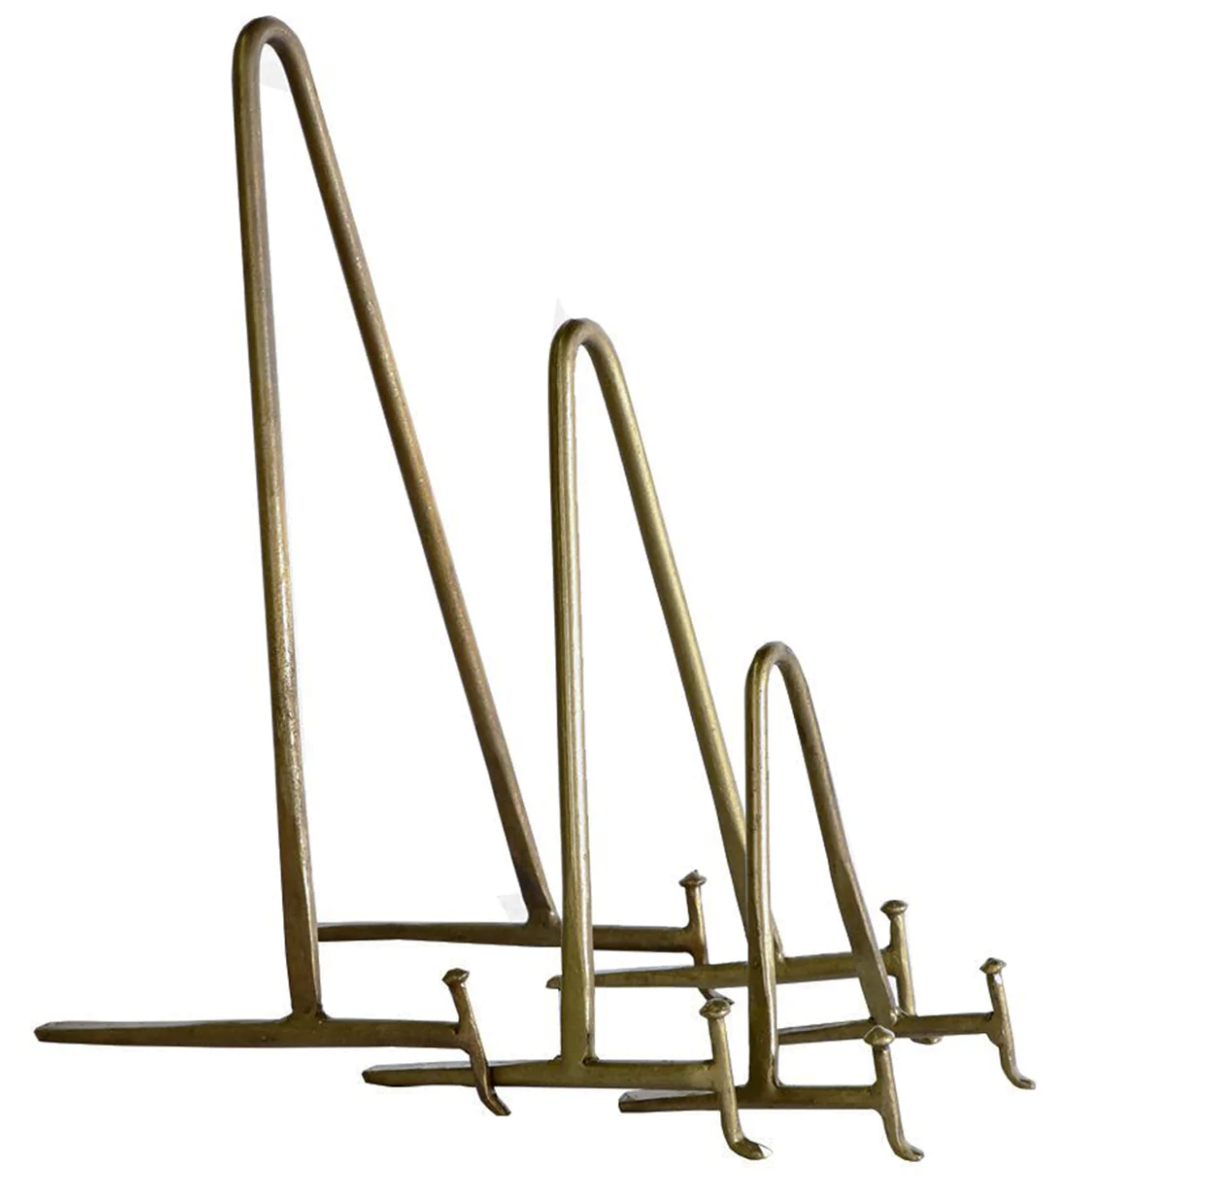 Antique Brass Stand - Large: Large antique brass stand with intricate design from Grace Blu Shoppe, perfect for displaying your favorite items.